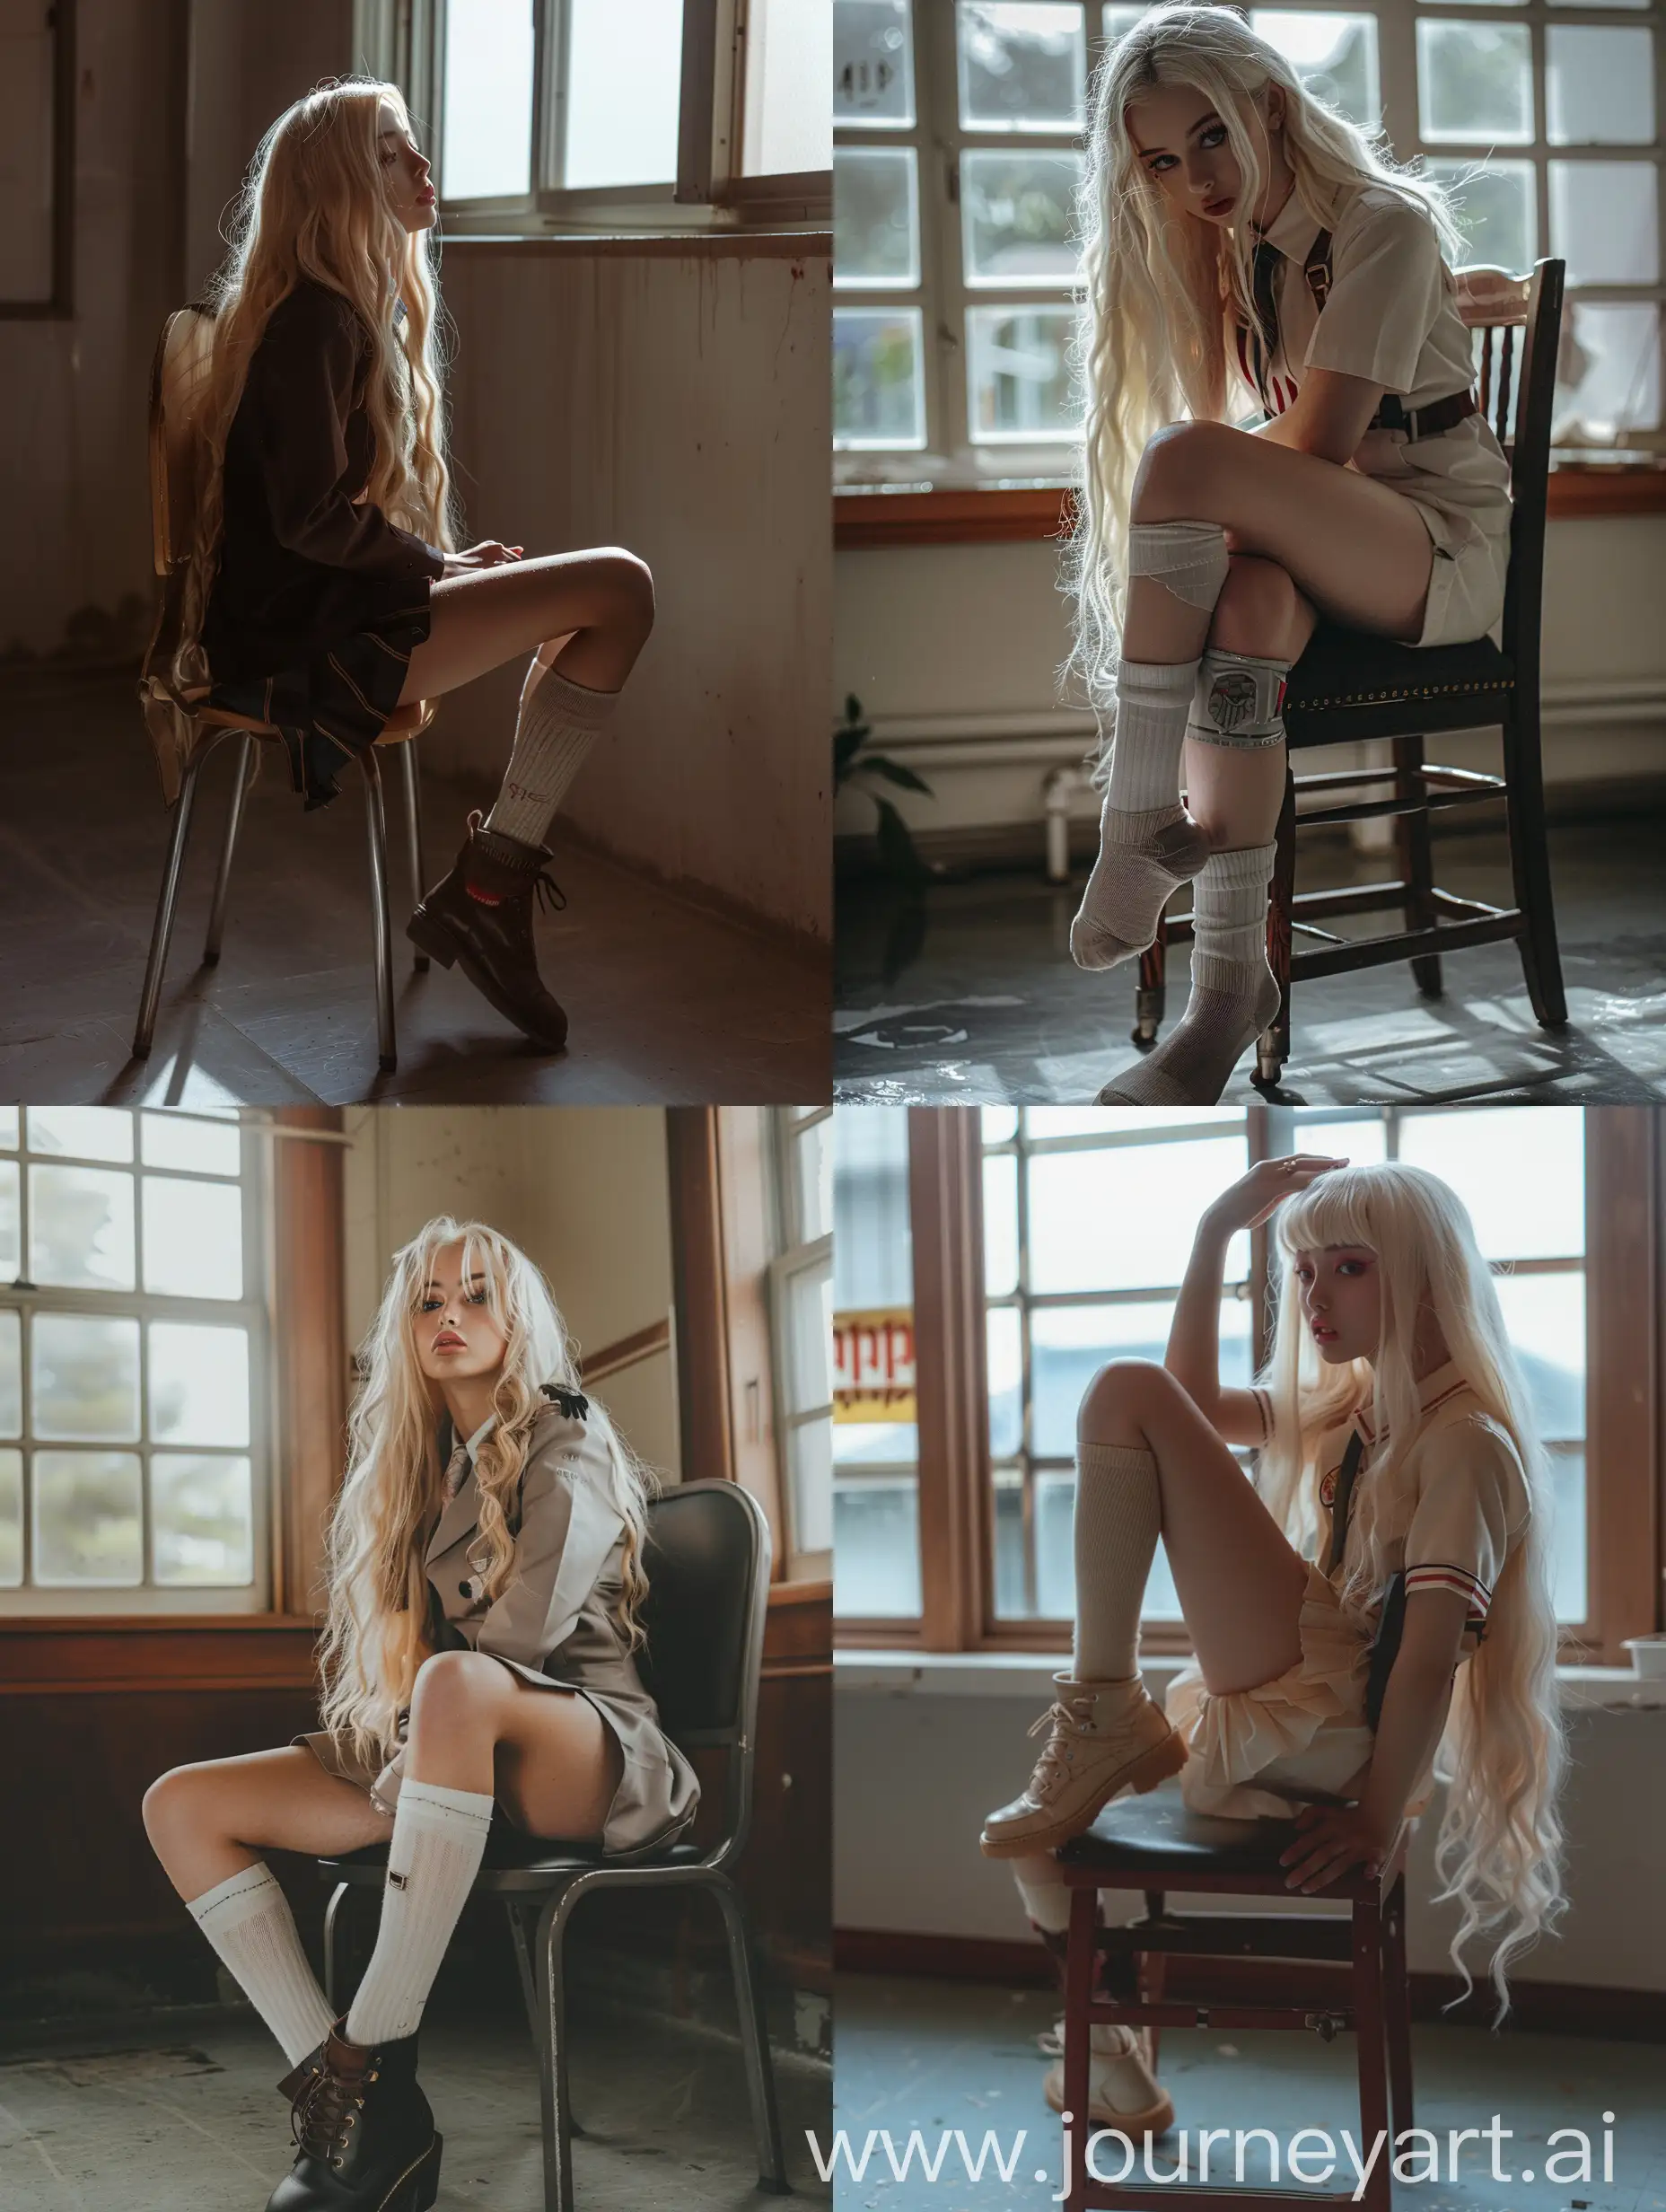 1 girl, long blond hair, 18 years old, influencer, beauty,   in the school, school uniform, makeup, ,sitting on chair, down view, socks and boots, 4k, knee raised